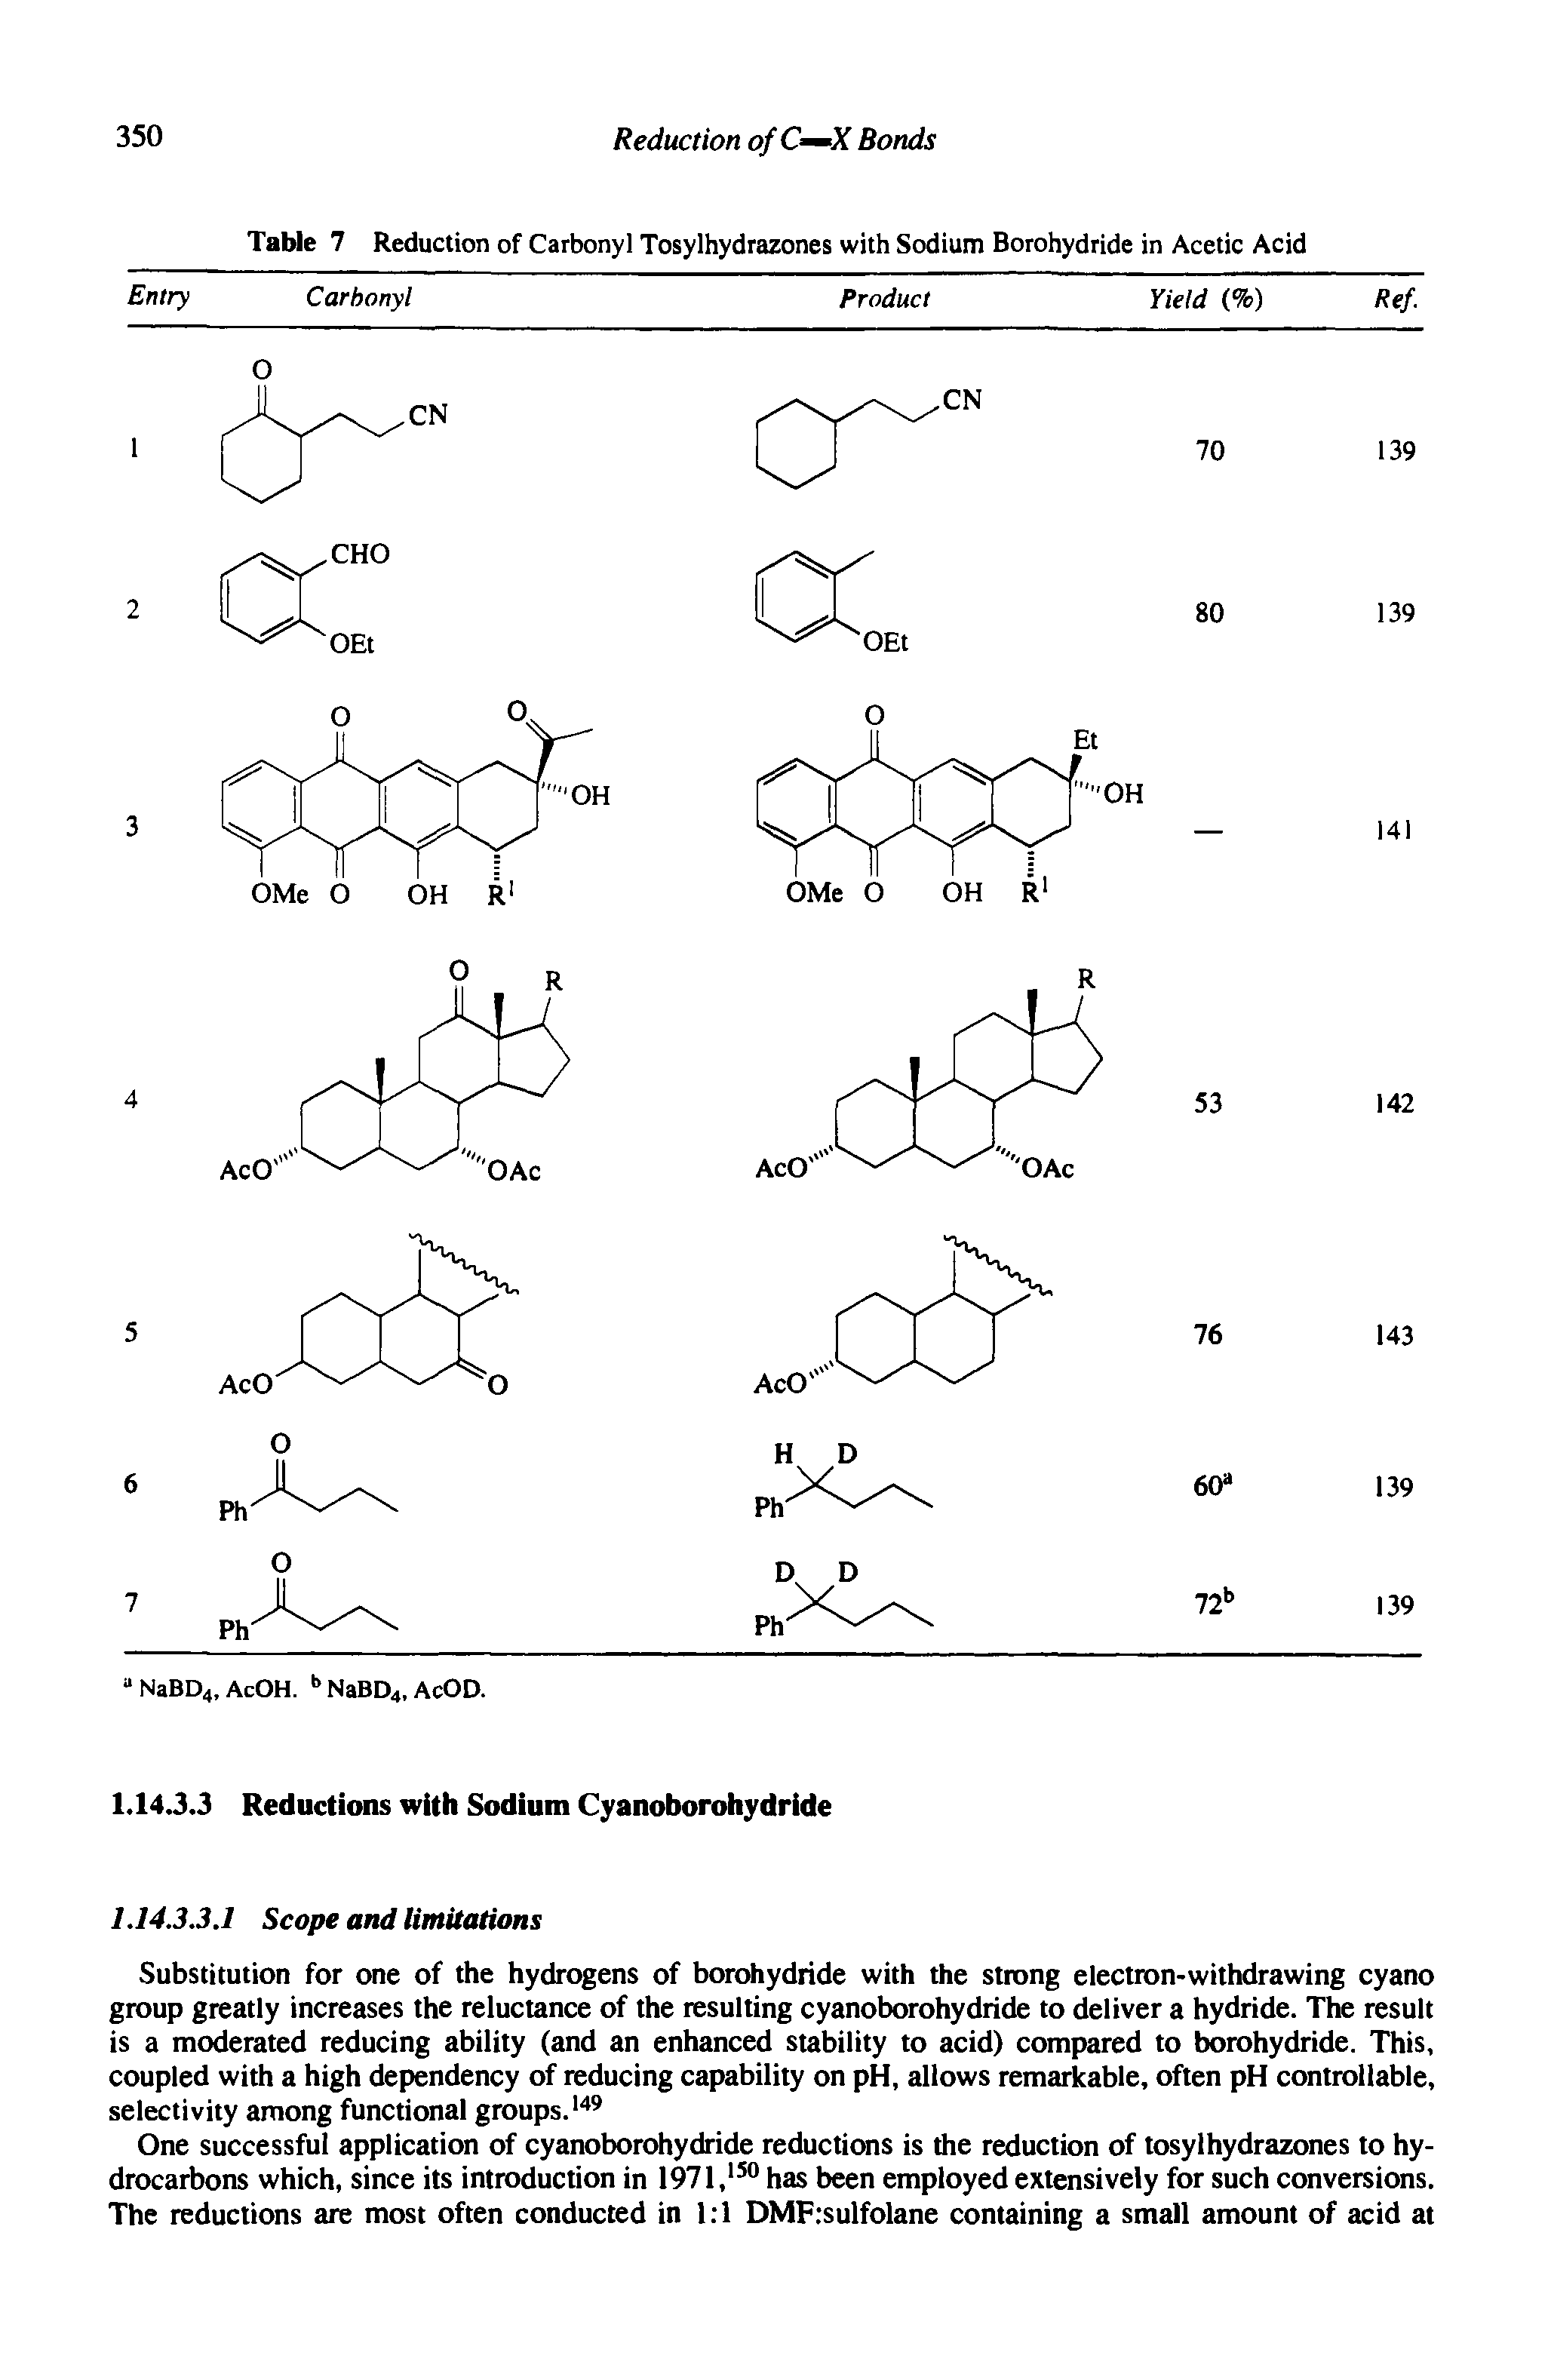 Table 7 Reduction of Carbonyl Tosylhydrazones with Sodium Borohydride in Acetic Acid...